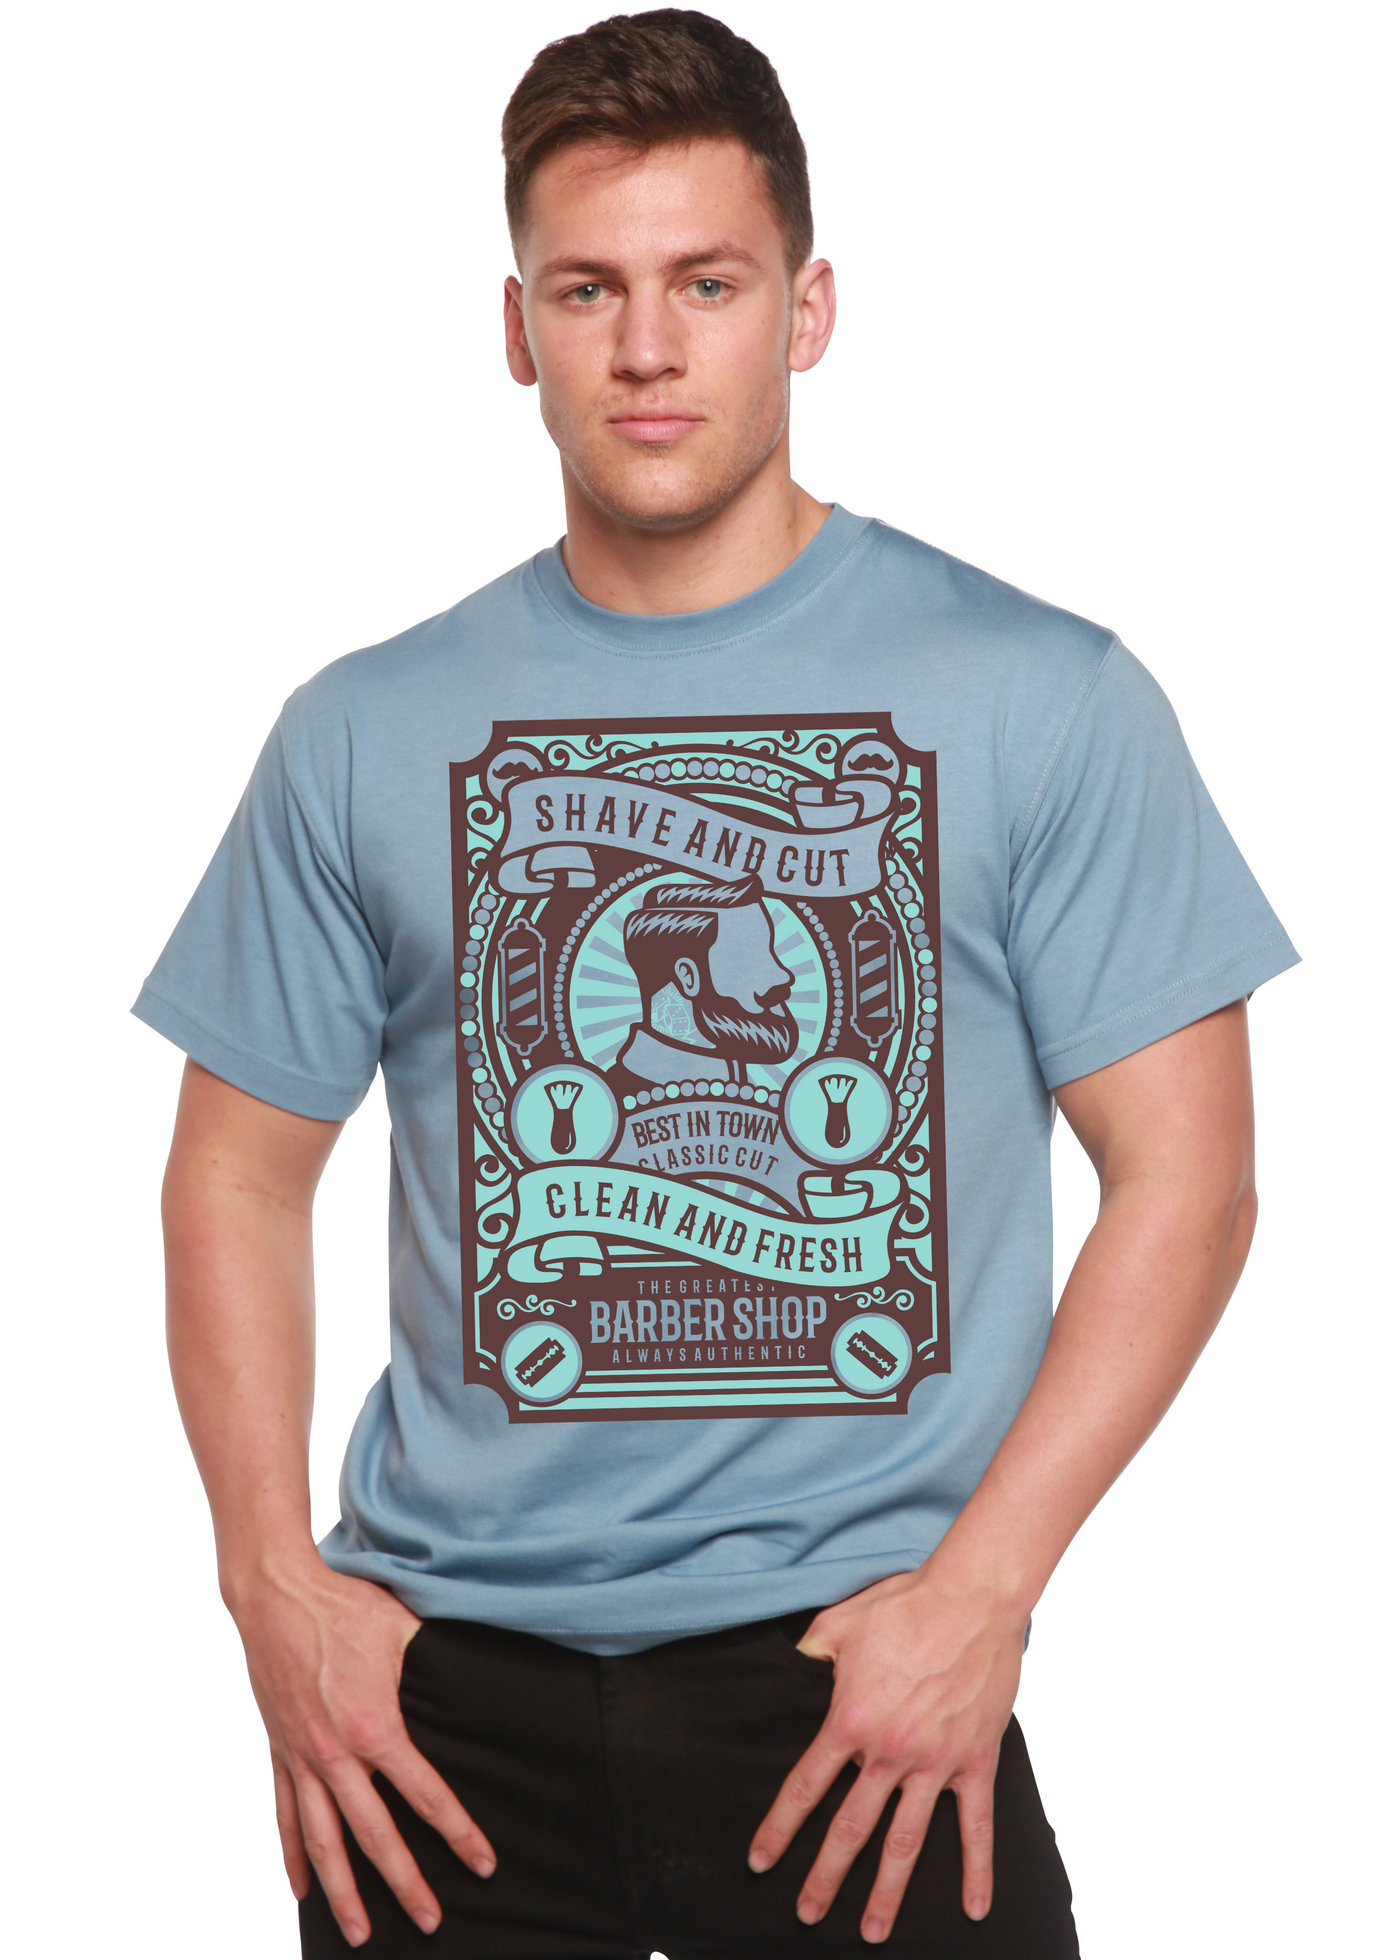 Shave and Cut men's bamboo tshirt infinity blue